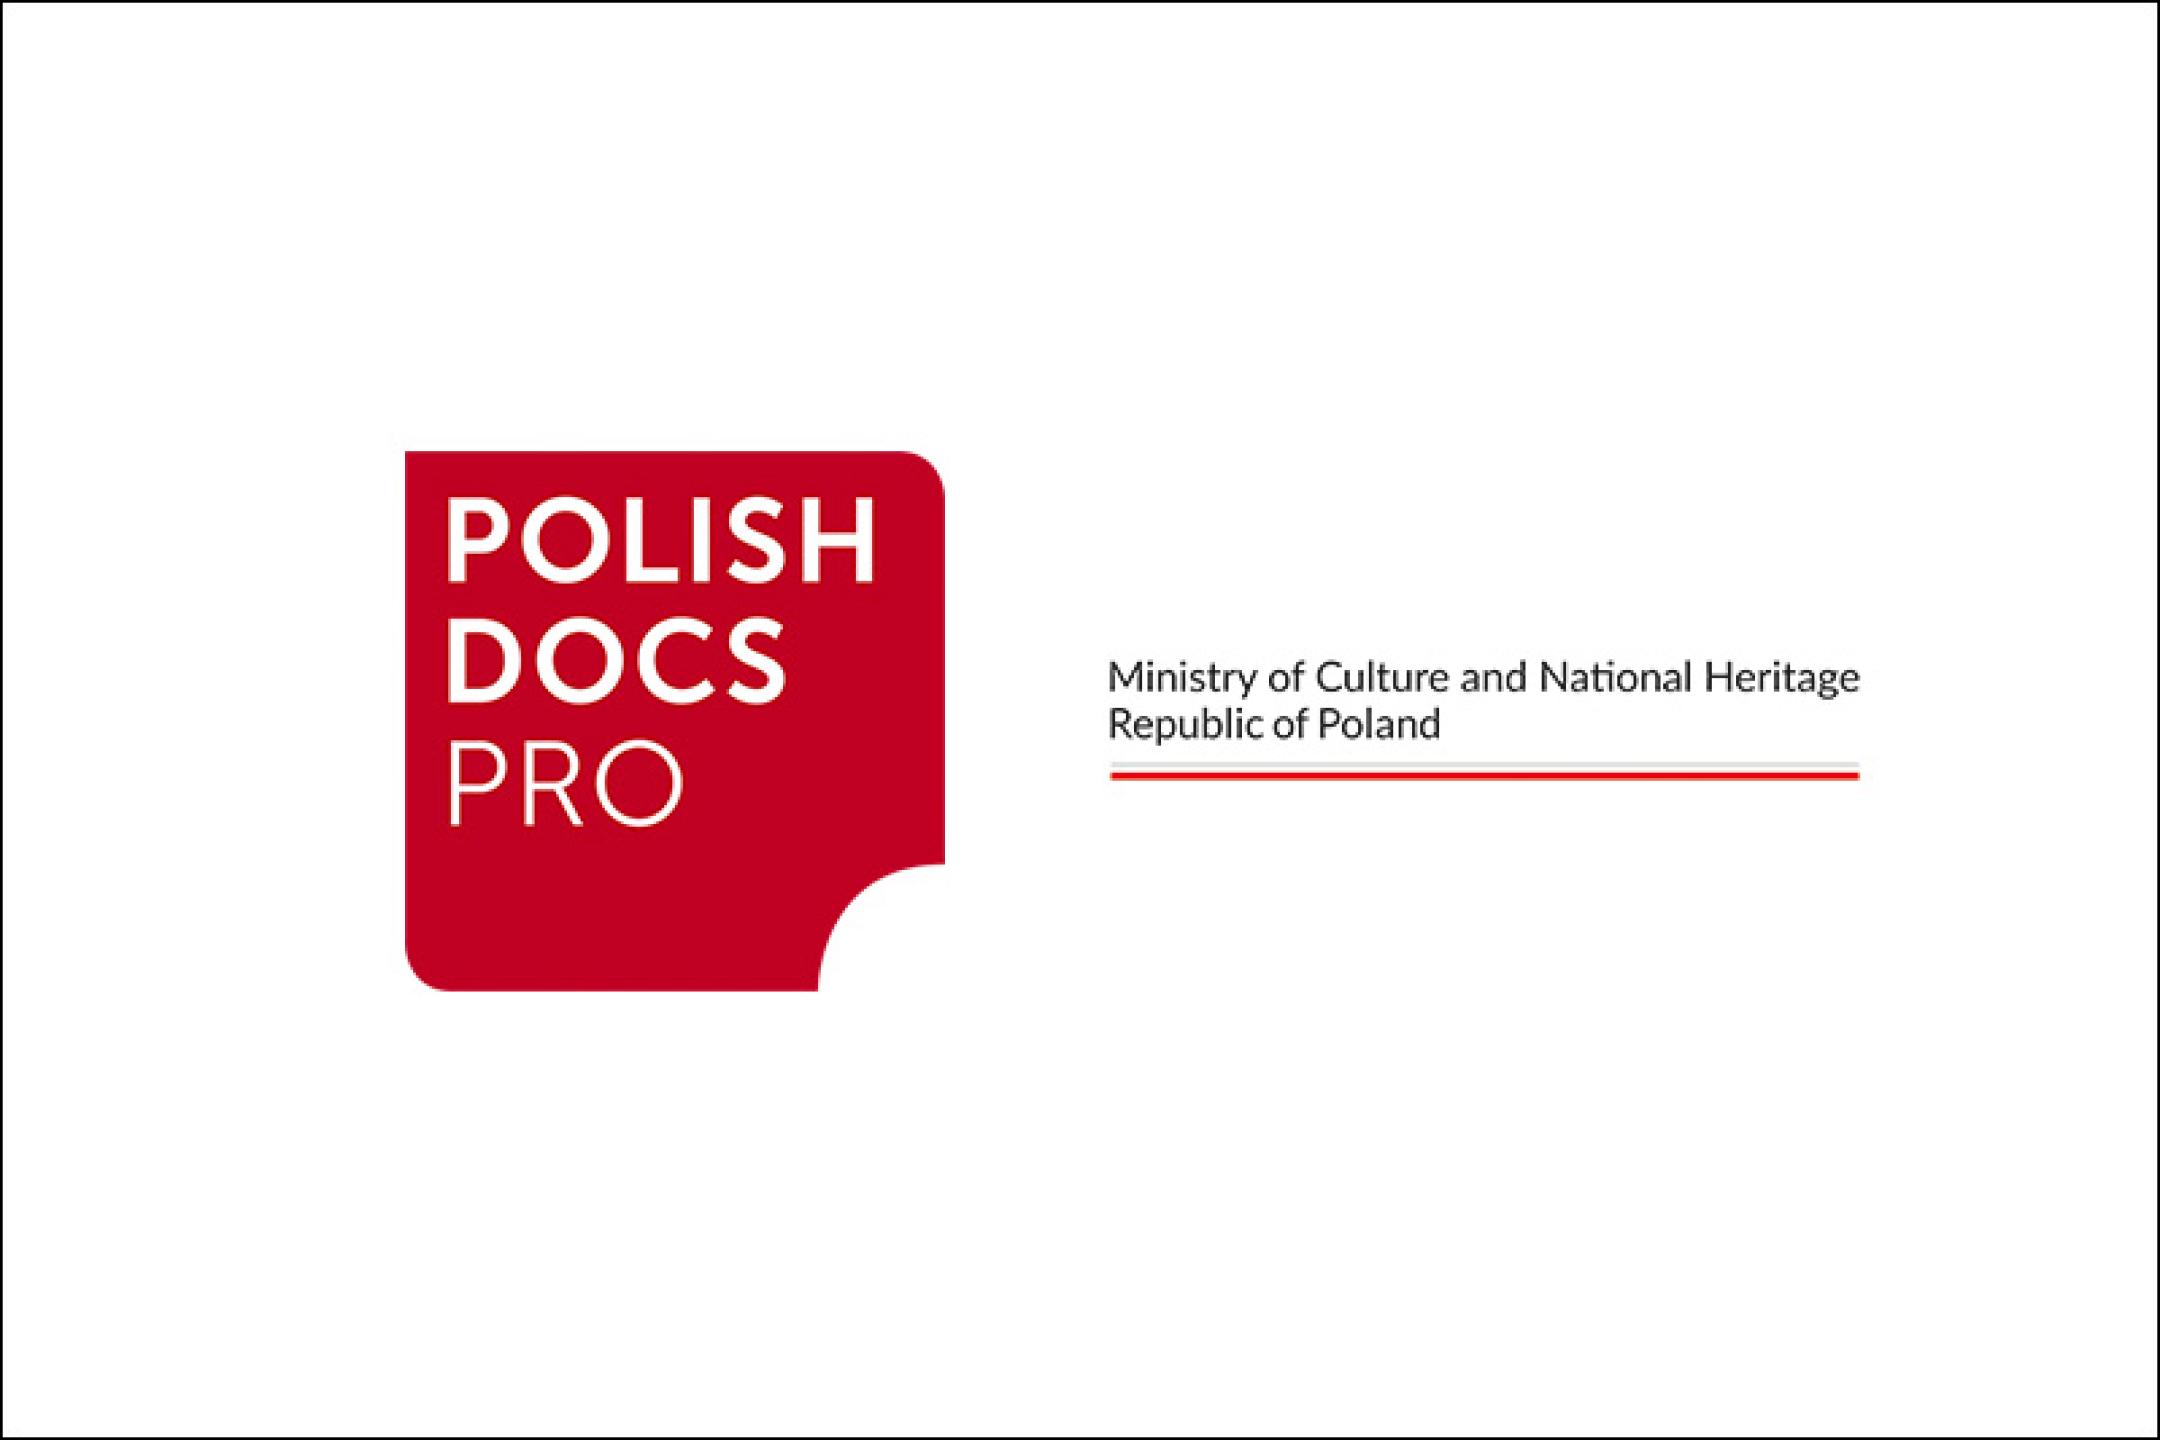 Logos Polish Docs Pro and Ministry of Culture Poland